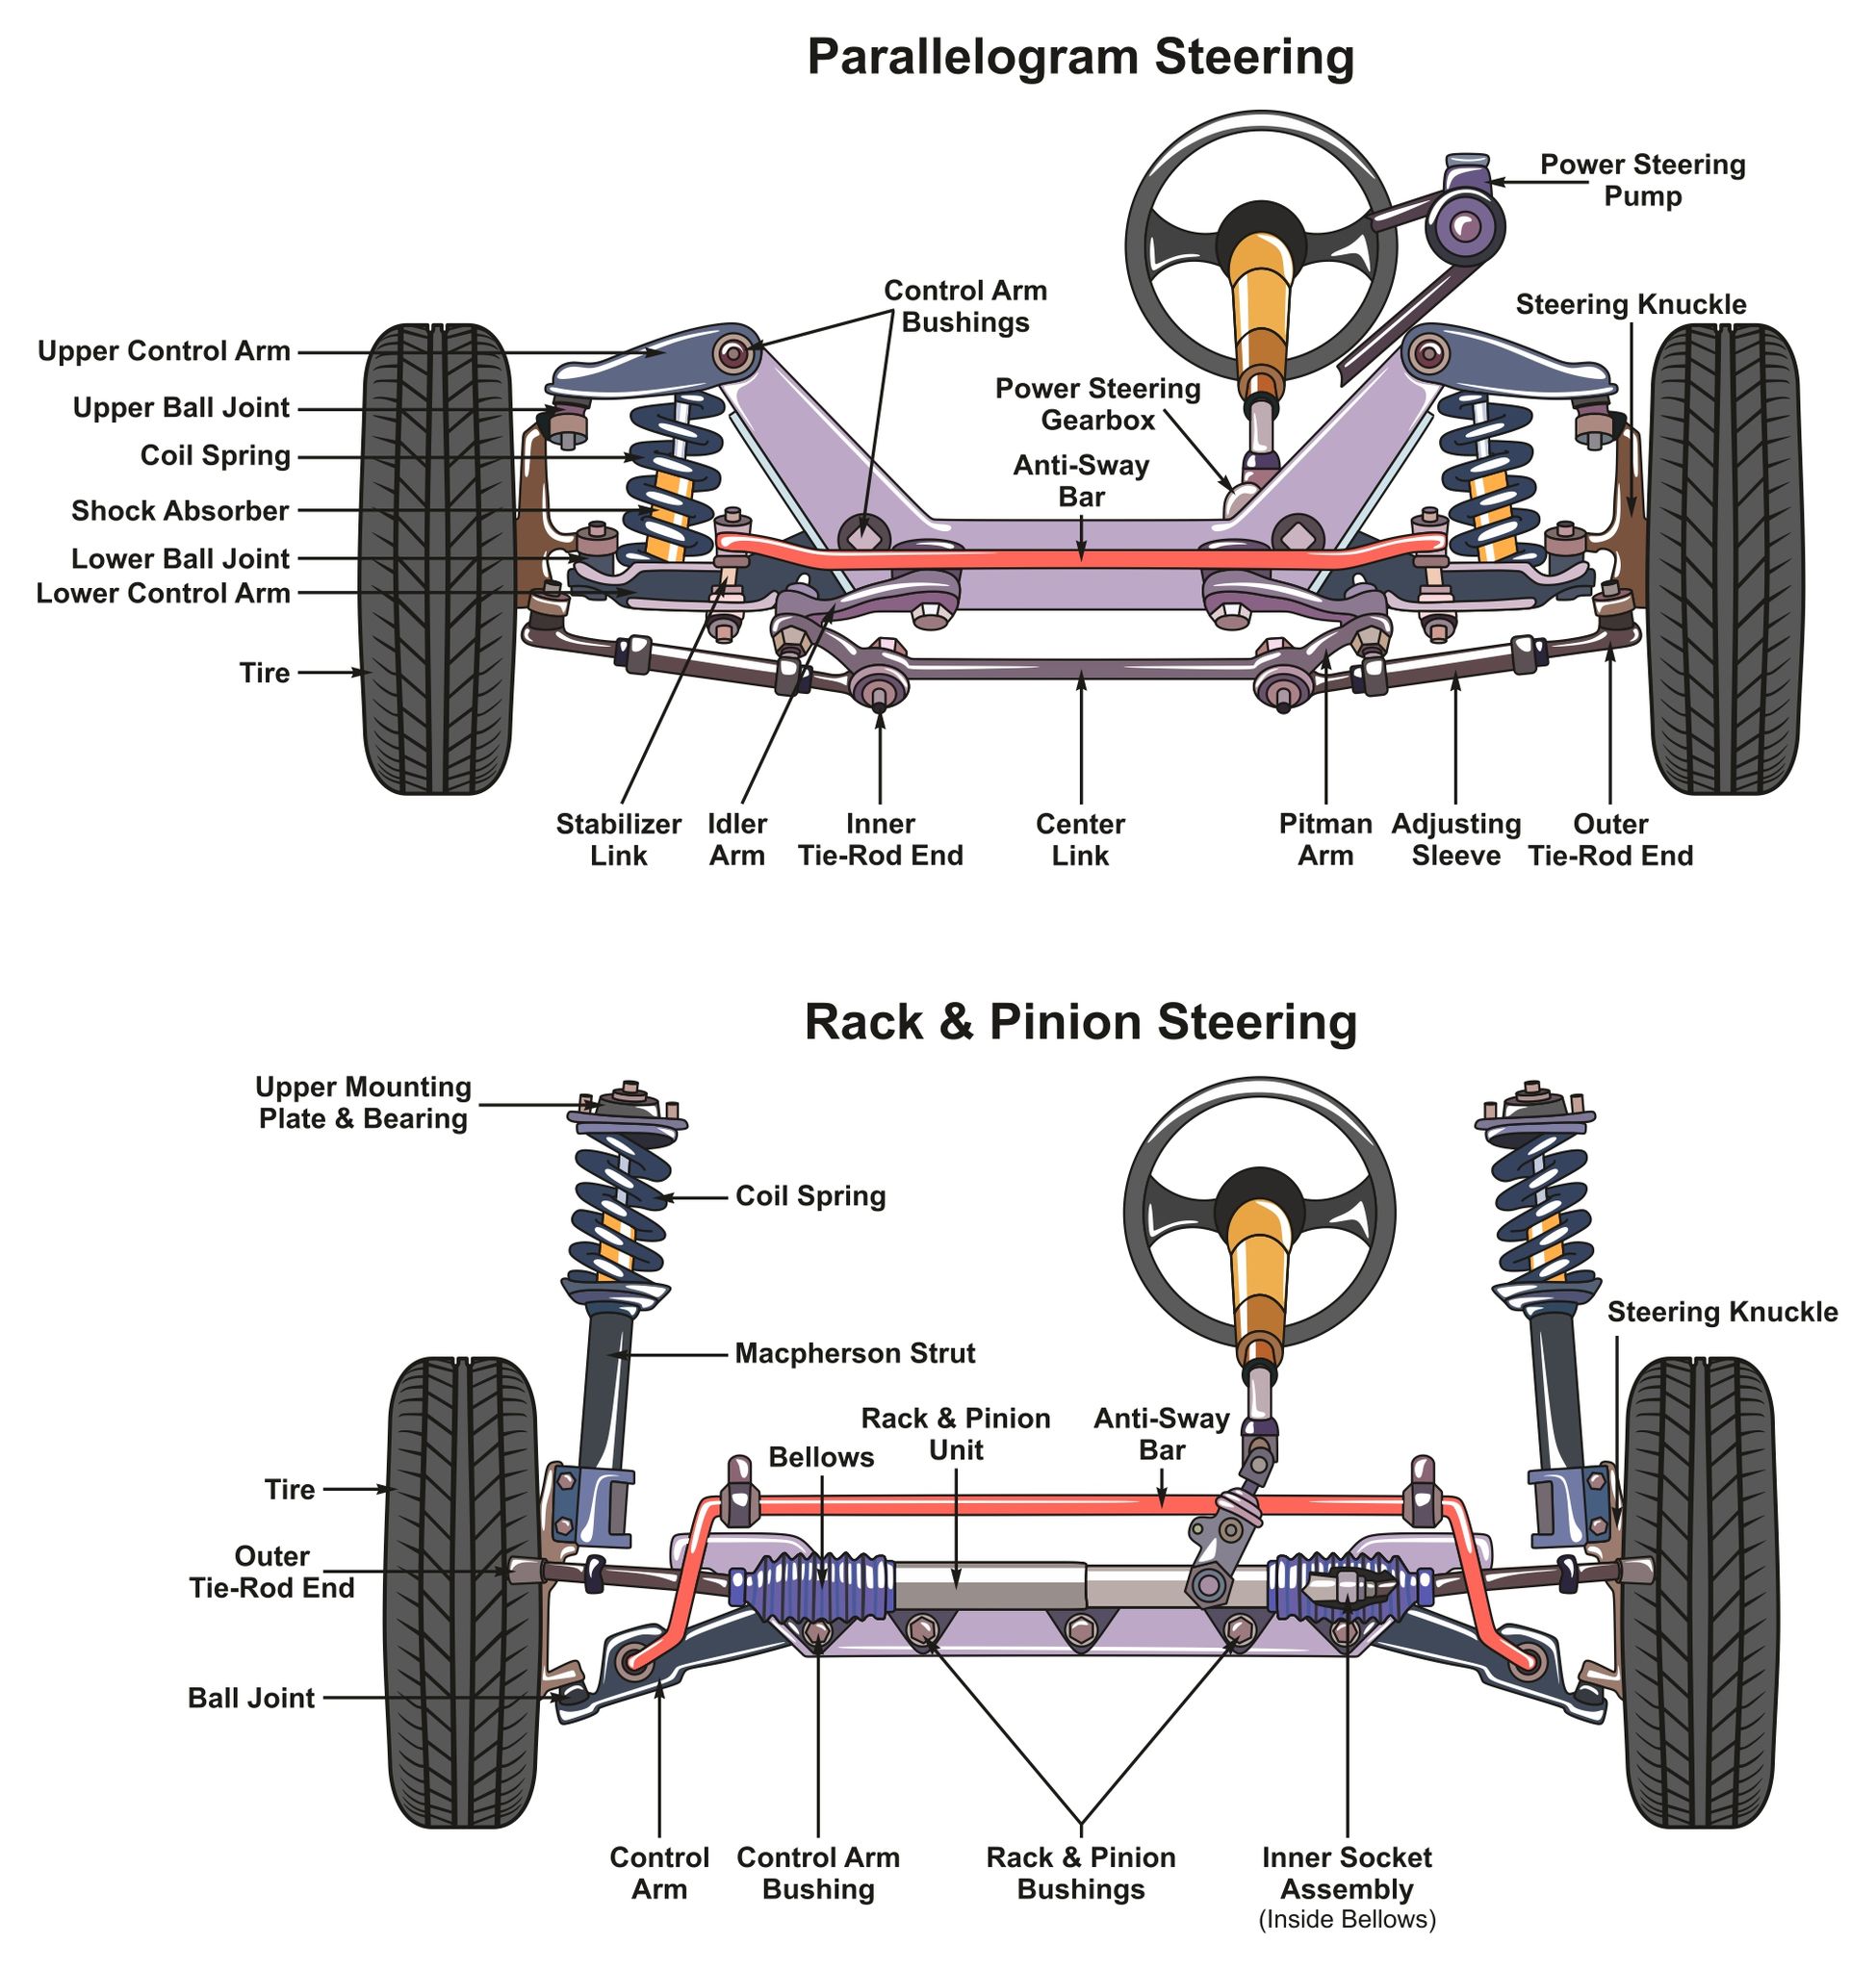 Worn Shock Absorbers are Dangerous and Potentially Life-Threatening